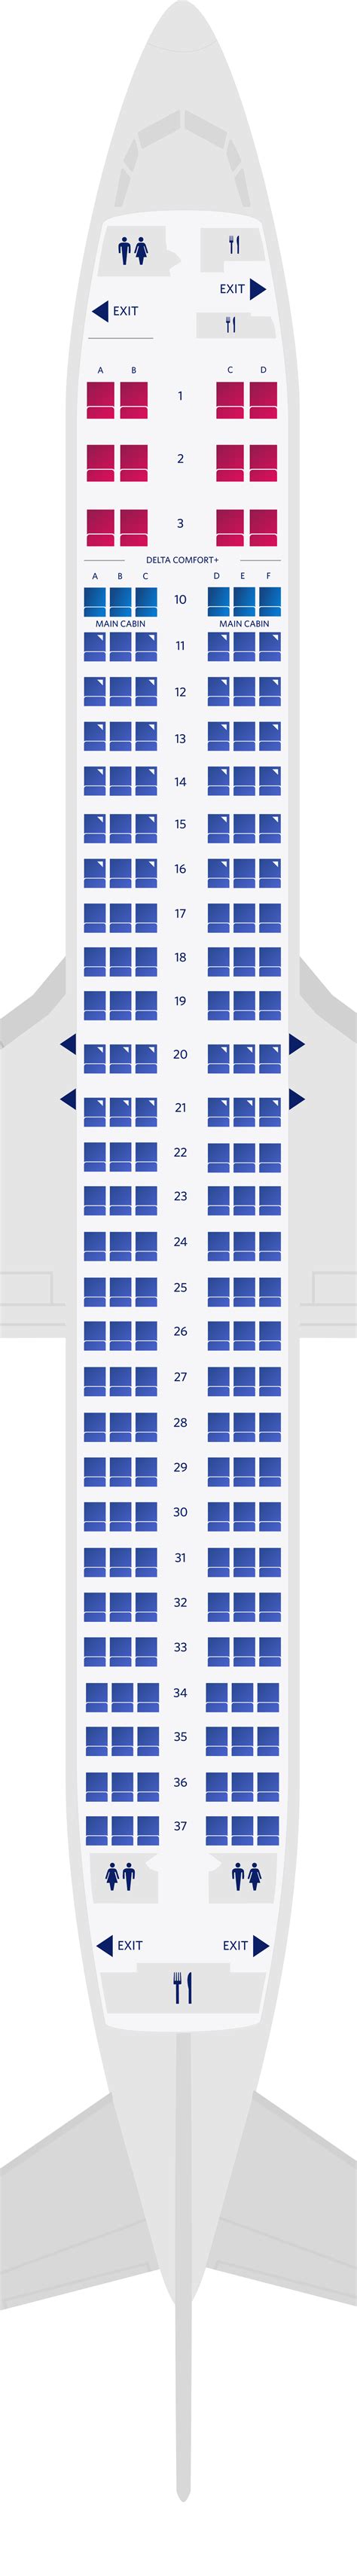 Boeing 737 seat layout. Read user reviews for United Boeing 777-200 (772) Layout 5. Submitted by SeatGuru User on 2020/02/04 for Seat 7D. Avoid any middle row seats in aisles 7 and 8. There is a ceiling vent that blasts cold air from the galley above these two rows and the crew cannot turn it off. I was freezing during an 11 hour flight. 